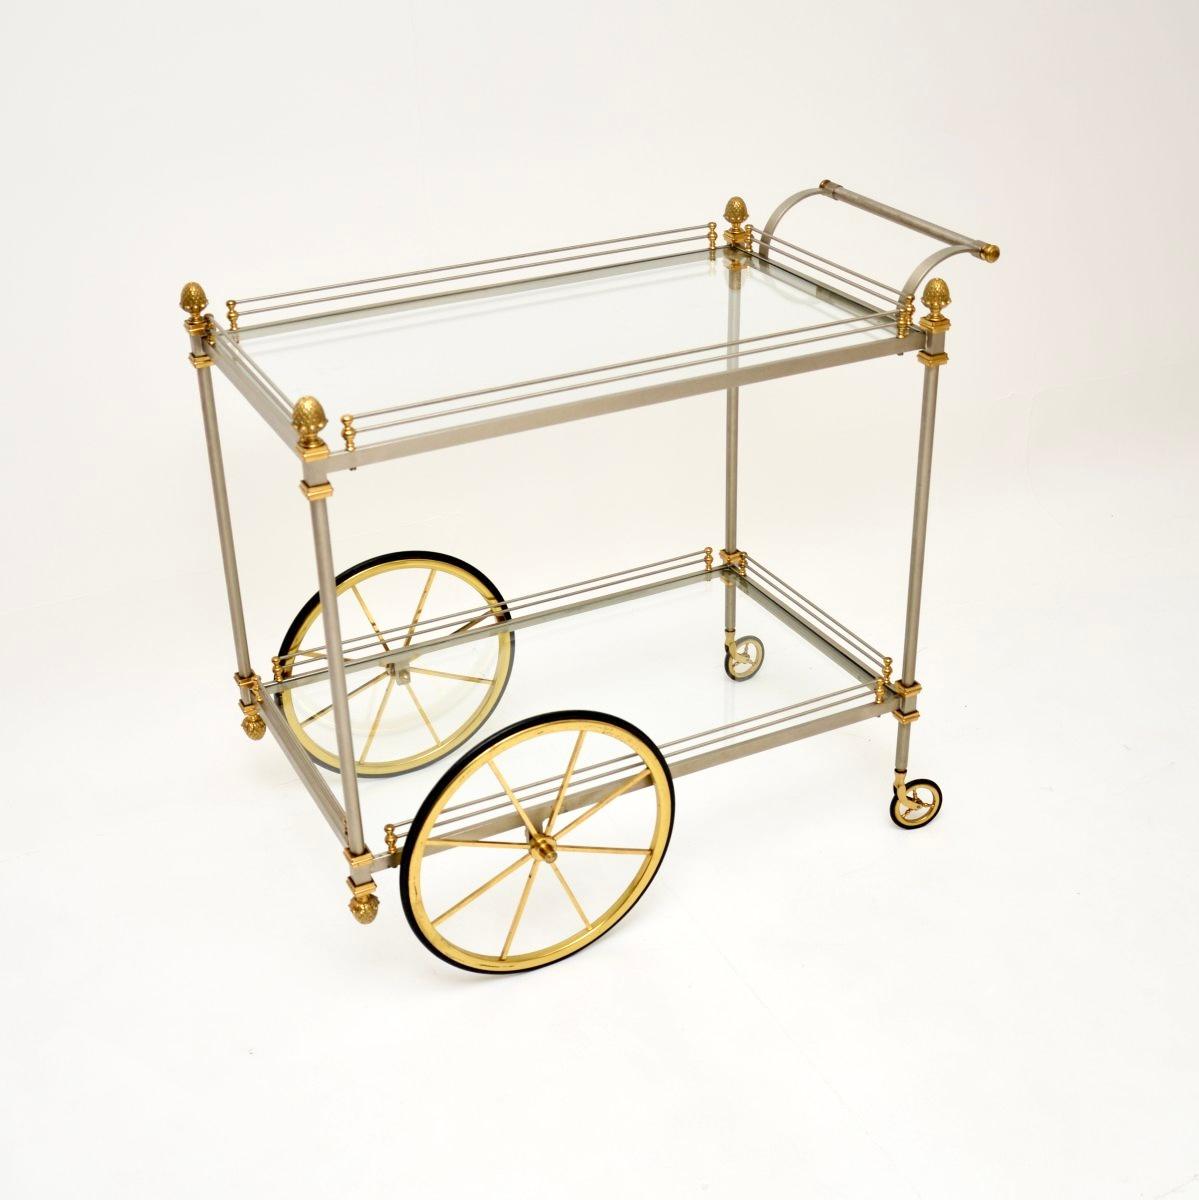 A magnificent and large vintage French drinks trolley in steel and brass, dating from the 1970’s.

This is of exceptional quality, it is extremely finely crafted and is much larger than drinks trolleys usually seen. The brushed steel frame is